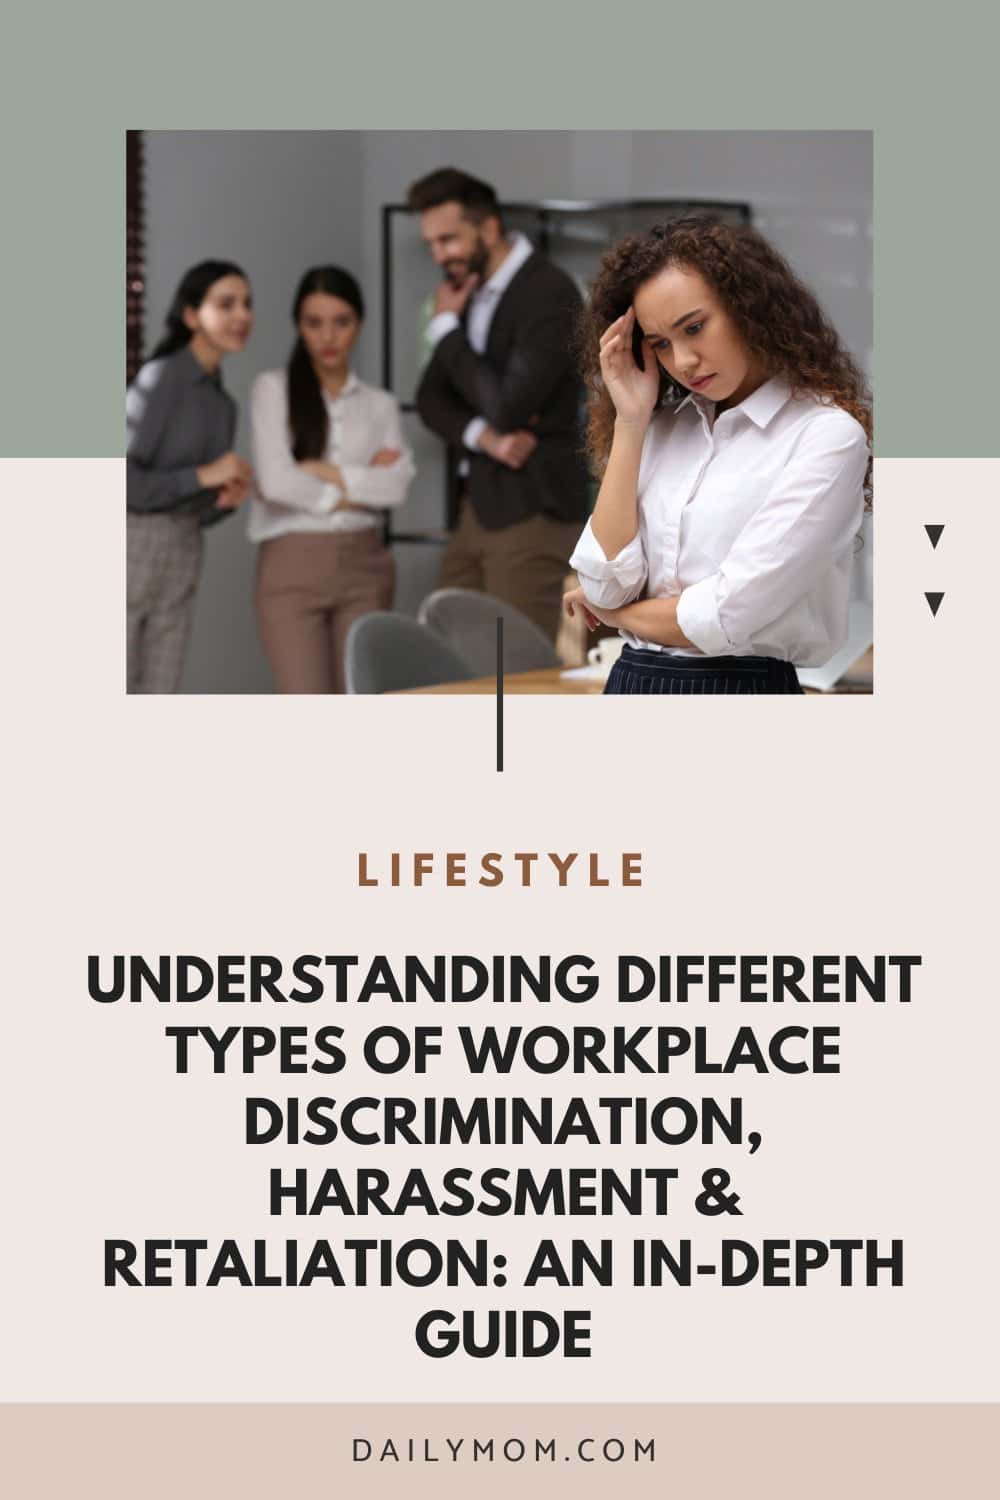 Understanding Different Types of Workplace Discrimination, Harassment & Retaliation: An In-Depth Guide 7 Daily Mom, Magazine for Families